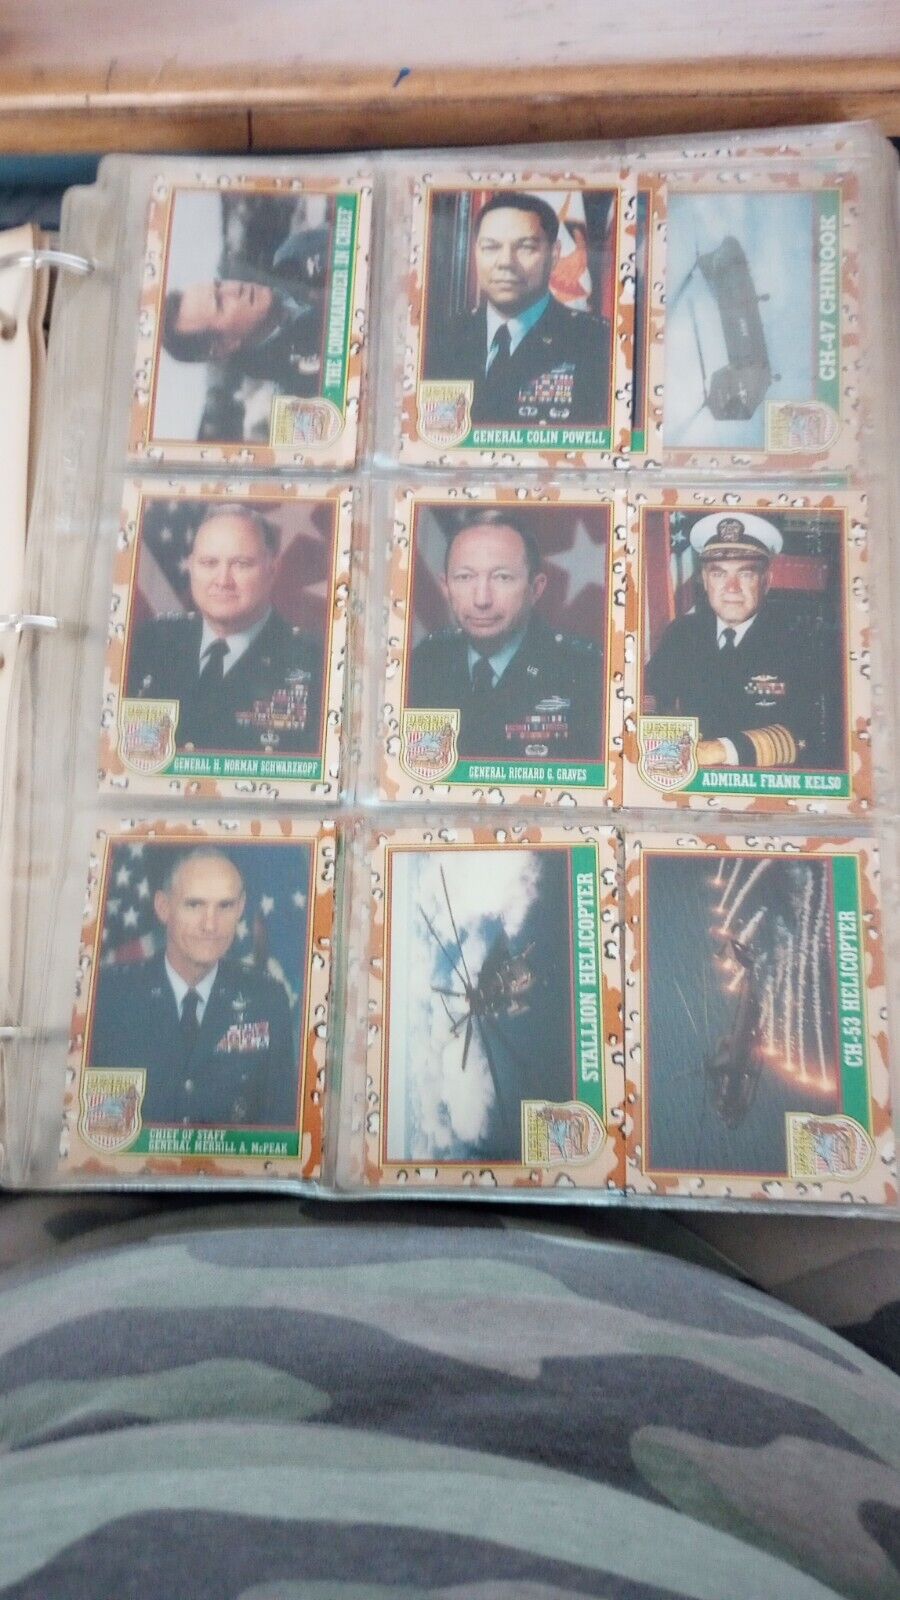 273 dessert storm trading cards in album there are duplicates